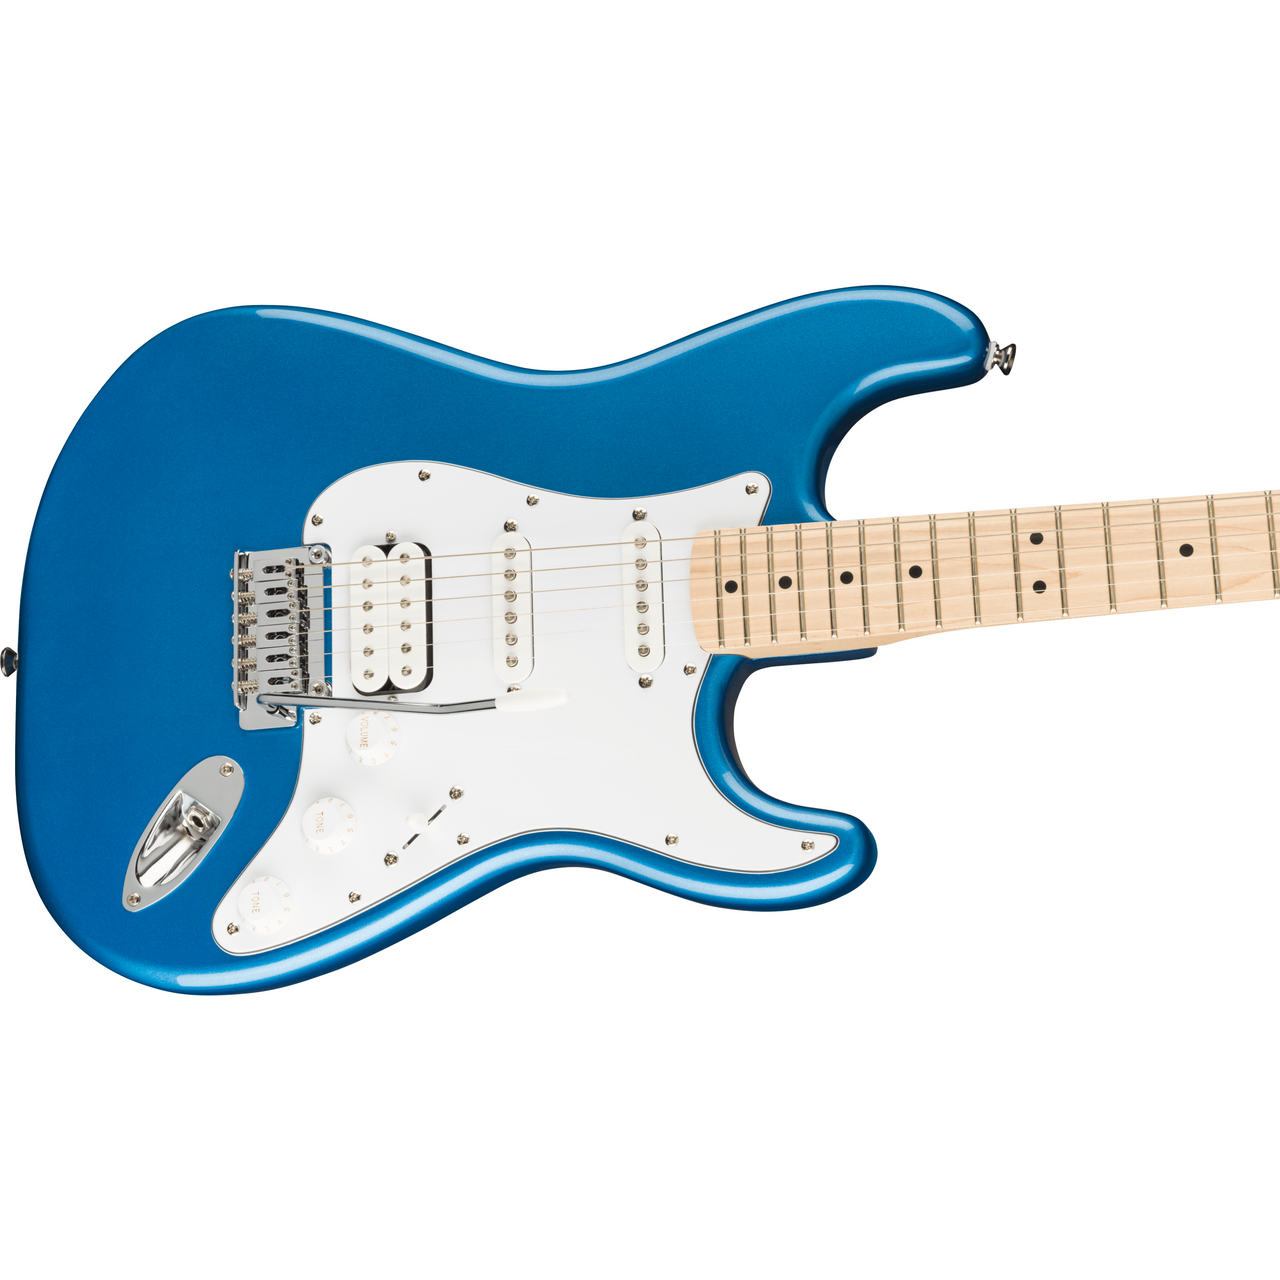 Paquete Guitarra Electrica Fender Affinity Series Stratocaster HSS Blue 0372820002